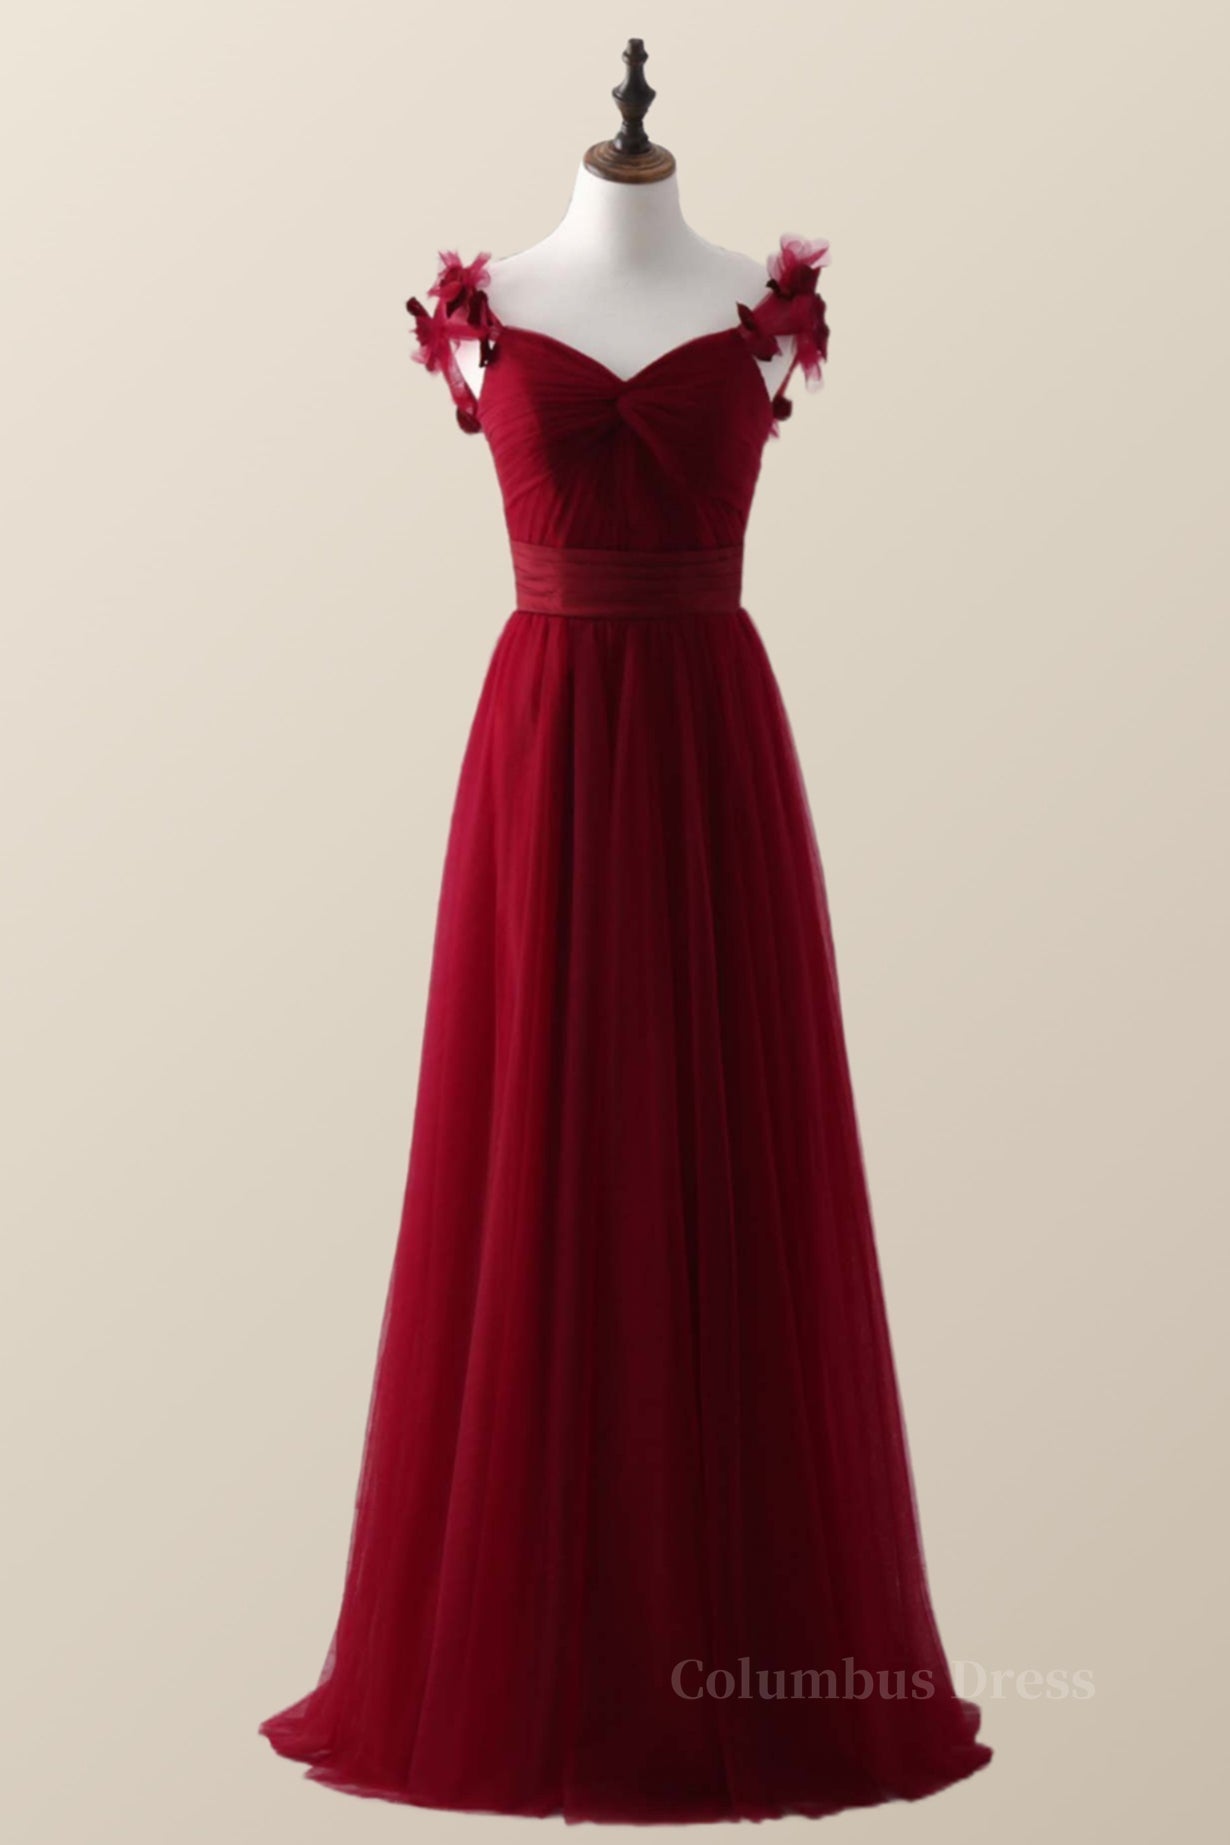 Knotted Front Red Tulle A-line Long Corset Bridesmaid Dress outfit, Bridesmaid Dress Ideas